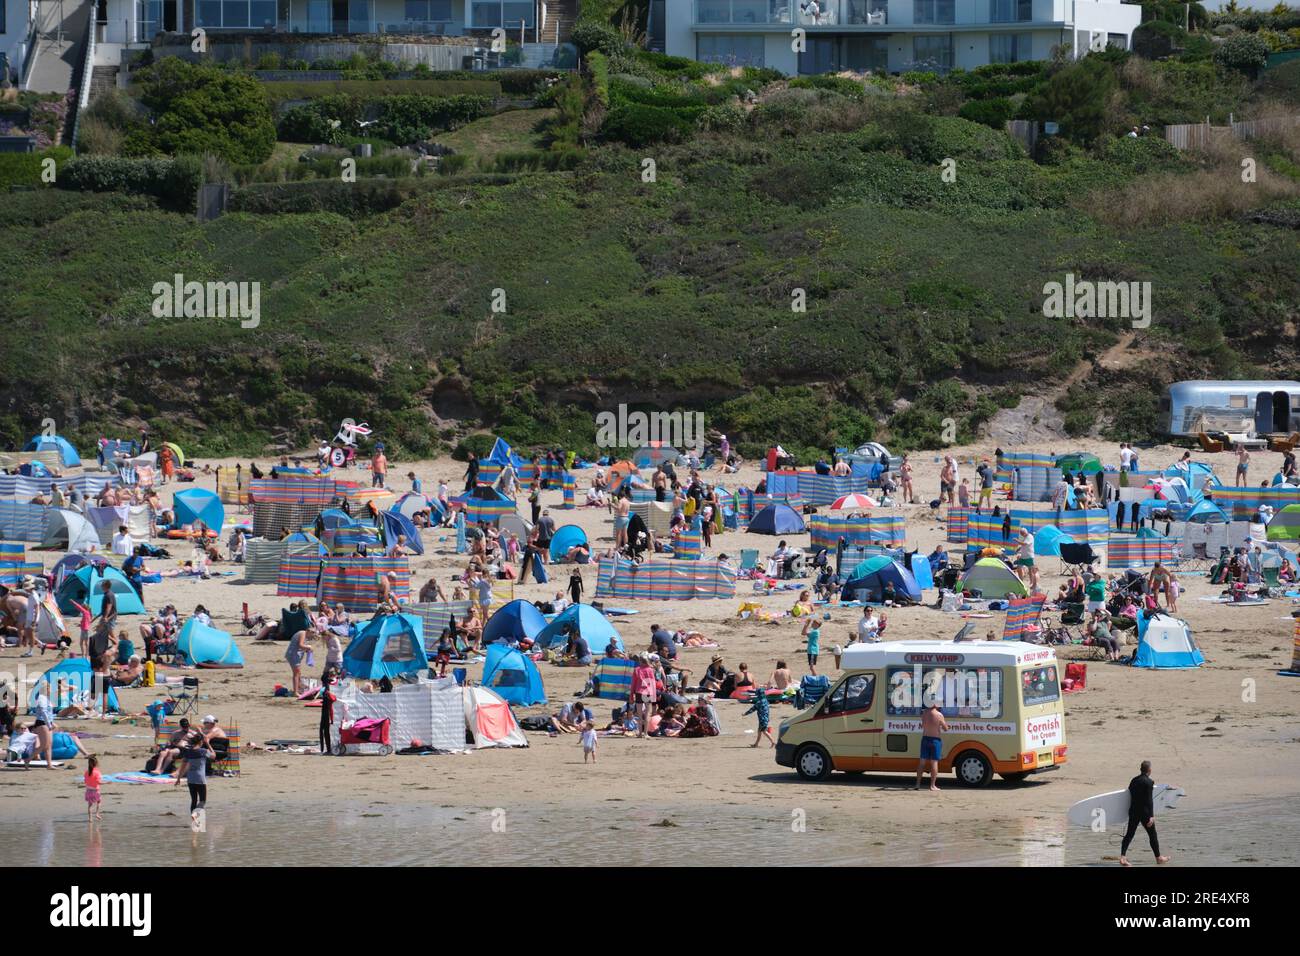 Polzeath, Cornwall, UK. 25th July 2023. UK Weather. With a sea breeze and temperature of 21 degrees C it was pleasant afternoon on a busy beach at Polzeath in North Cornwall today. Credit Simon Mayock / Alamy Live News. Stock Photo